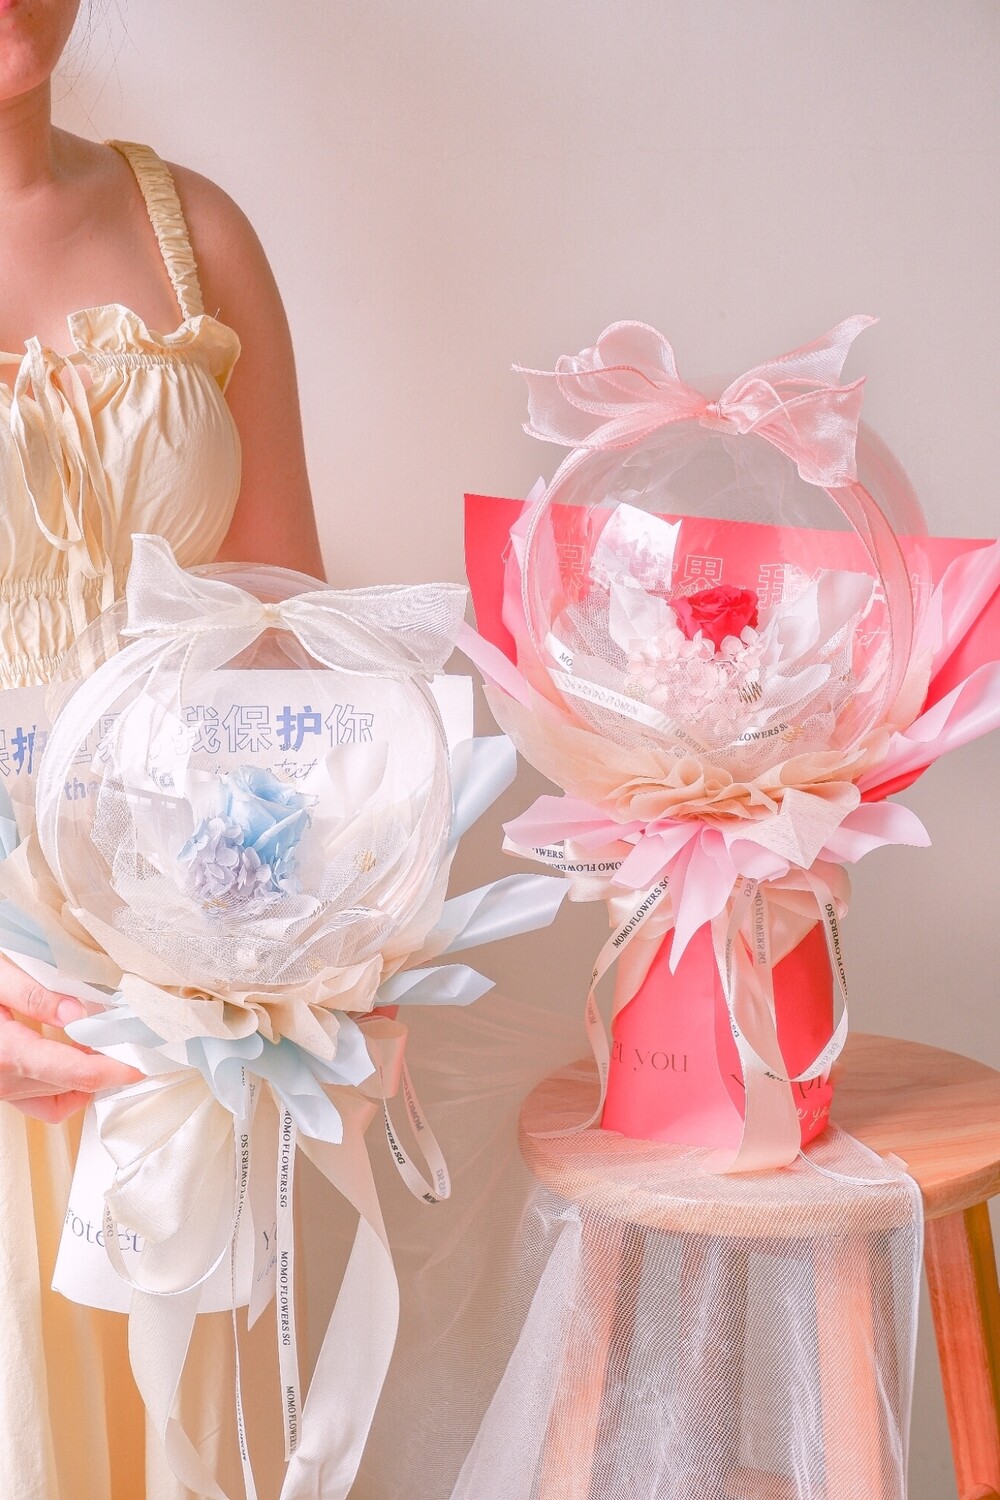 "I'll Protect You" Balloon Bouquet